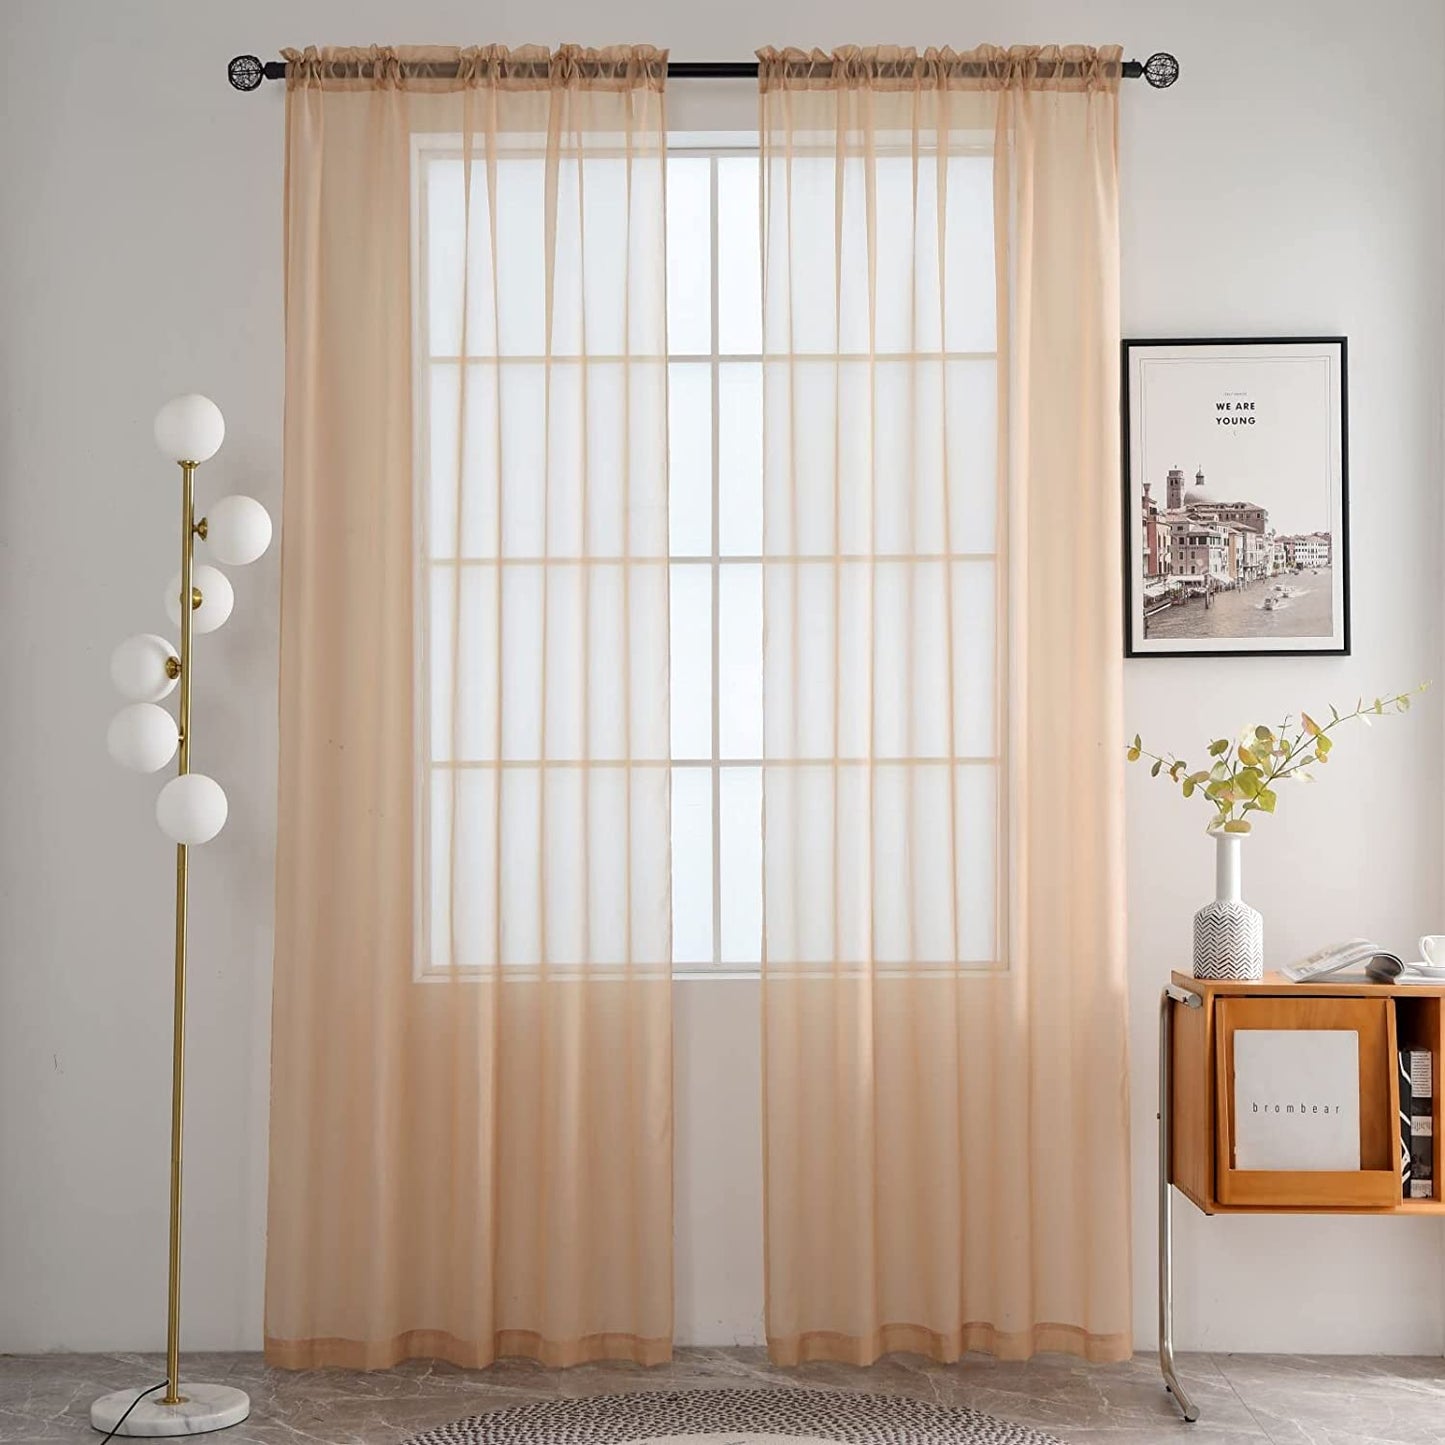 Spacedresser Basic Rod Pocket Sheer Voile Window Curtain Panels White 1 Pair 2 Panels 52 Width 84 Inch Long for Kitchen Bedroom Children Living Room Yard(White,52 W X 84 L)  Lucky Home Beige 70 W X 96 L 